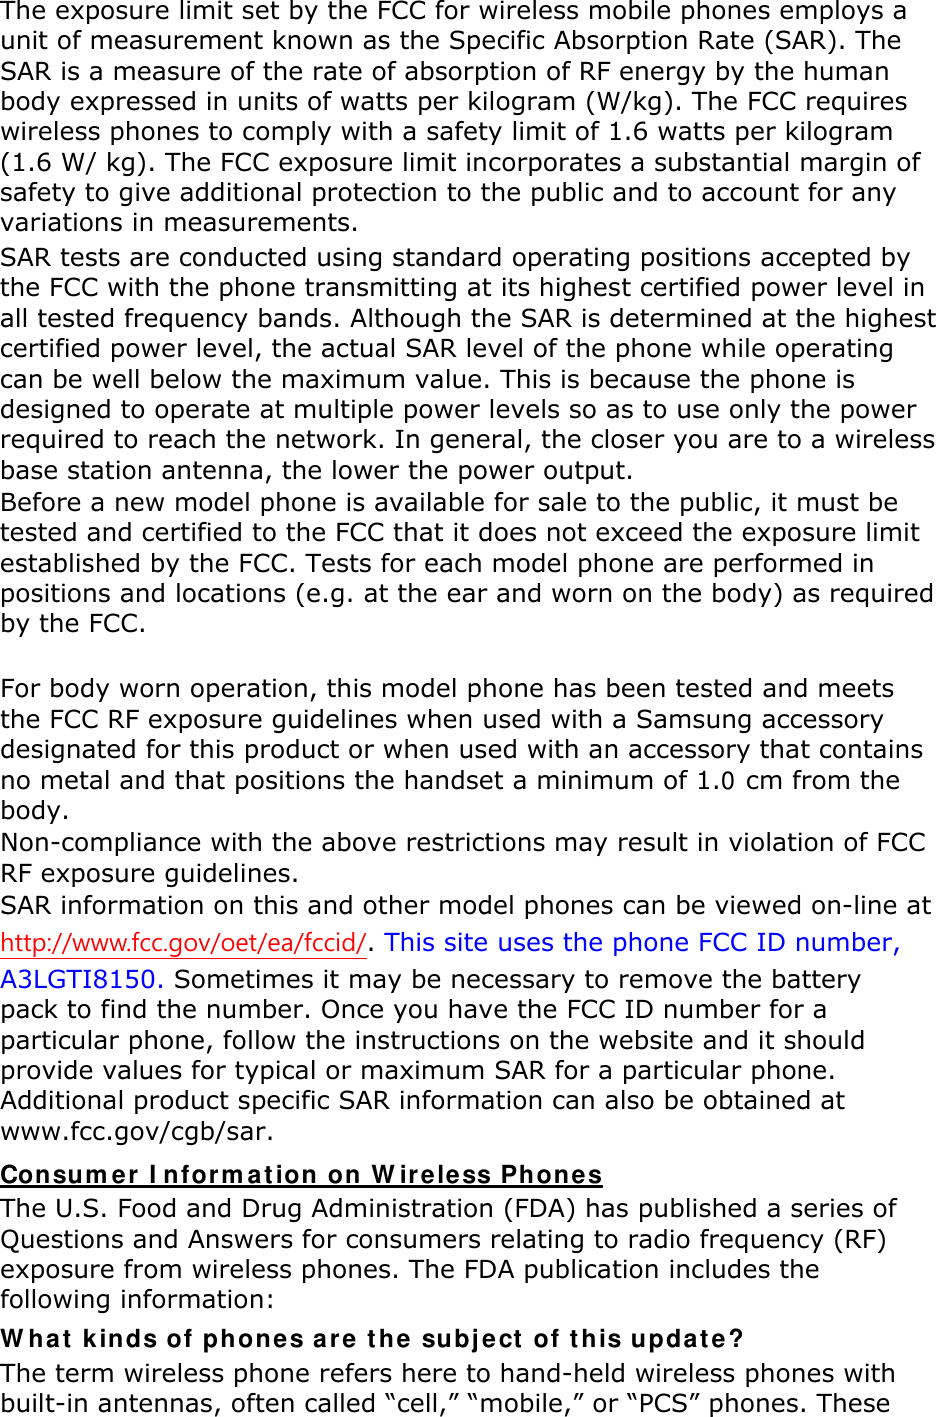 The exposure limit set by the FCC for wireless mobile phones employs a unit of measurement known as the Specific Absorption Rate (SAR). The SAR is a measure of the rate of absorption of RF energy by the human body expressed in units of watts per kilogram (W/kg). The FCC requires wireless phones to comply with a safety limit of 1.6 watts per kilogram (1.6 W/ kg). The FCC exposure limit incorporates a substantial margin of safety to give additional protection to the public and to account for any variations in measurements. SAR tests are conducted using standard operating positions accepted by the FCC with the phone transmitting at its highest certified power level in all tested frequency bands. Although the SAR is determined at the highest certified power level, the actual SAR level of the phone while operating can be well below the maximum value. This is because the phone is designed to operate at multiple power levels so as to use only the power required to reach the network. In general, the closer you are to a wireless base station antenna, the lower the power output. Before a new model phone is available for sale to the public, it must be tested and certified to the FCC that it does not exceed the exposure limit established by the FCC. Tests for each model phone are performed in positions and locations (e.g. at the ear and worn on the body) as required by the FCC.      For body worn operation, this model phone has been tested and meets the FCC RF exposure guidelines when used with a Samsung accessory designated for this product or when used with an accessory that contains no metal and that positions the handset a minimum of 1.0 cm from the body.   Non-compliance with the above restrictions may result in violation of FCC RF exposure guidelines. SAR information on this and other model phones can be viewed on-line at http://www.fcc.gov/oet/ea/fccid/. This site uses the phone FCC ID number, A3LGTI8150. Sometimes it may be necessary to remove the battery pack to find the number. Once you have the FCC ID number for a particular phone, follow the instructions on the website and it should provide values for typical or maximum SAR for a particular phone. Additional product specific SAR information can also be obtained at www.fcc.gov/cgb/sar. Consumer Information on Wireless Phones The U.S. Food and Drug Administration (FDA) has published a series of Questions and Answers for consumers relating to radio frequency (RF) exposure from wireless phones. The FDA publication includes the following information: What kinds of phones are the subject of this update? The term wireless phone refers here to hand-held wireless phones with built-in antennas, often called “cell,” “mobile,” or “PCS” phones. These 